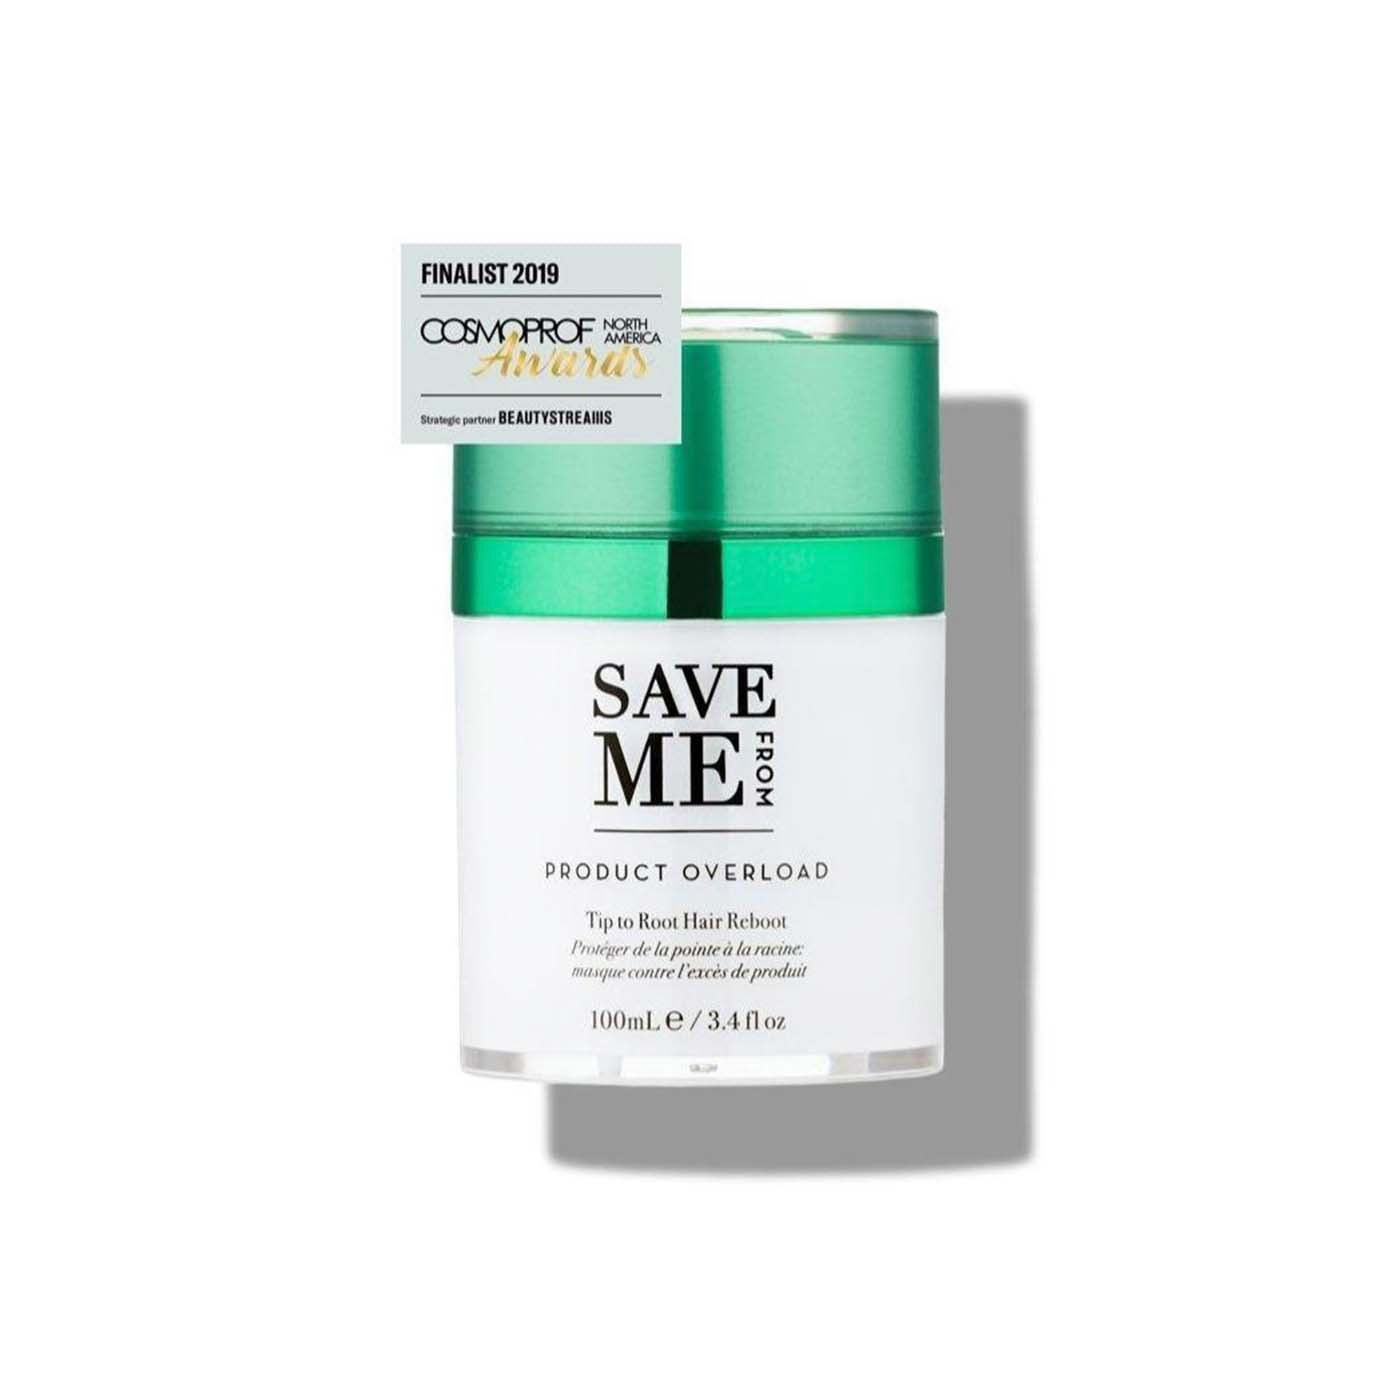 PRODUCT OVERLOAD - Tip to Root Hair Reboot 3.4 fl oz | Save Me From